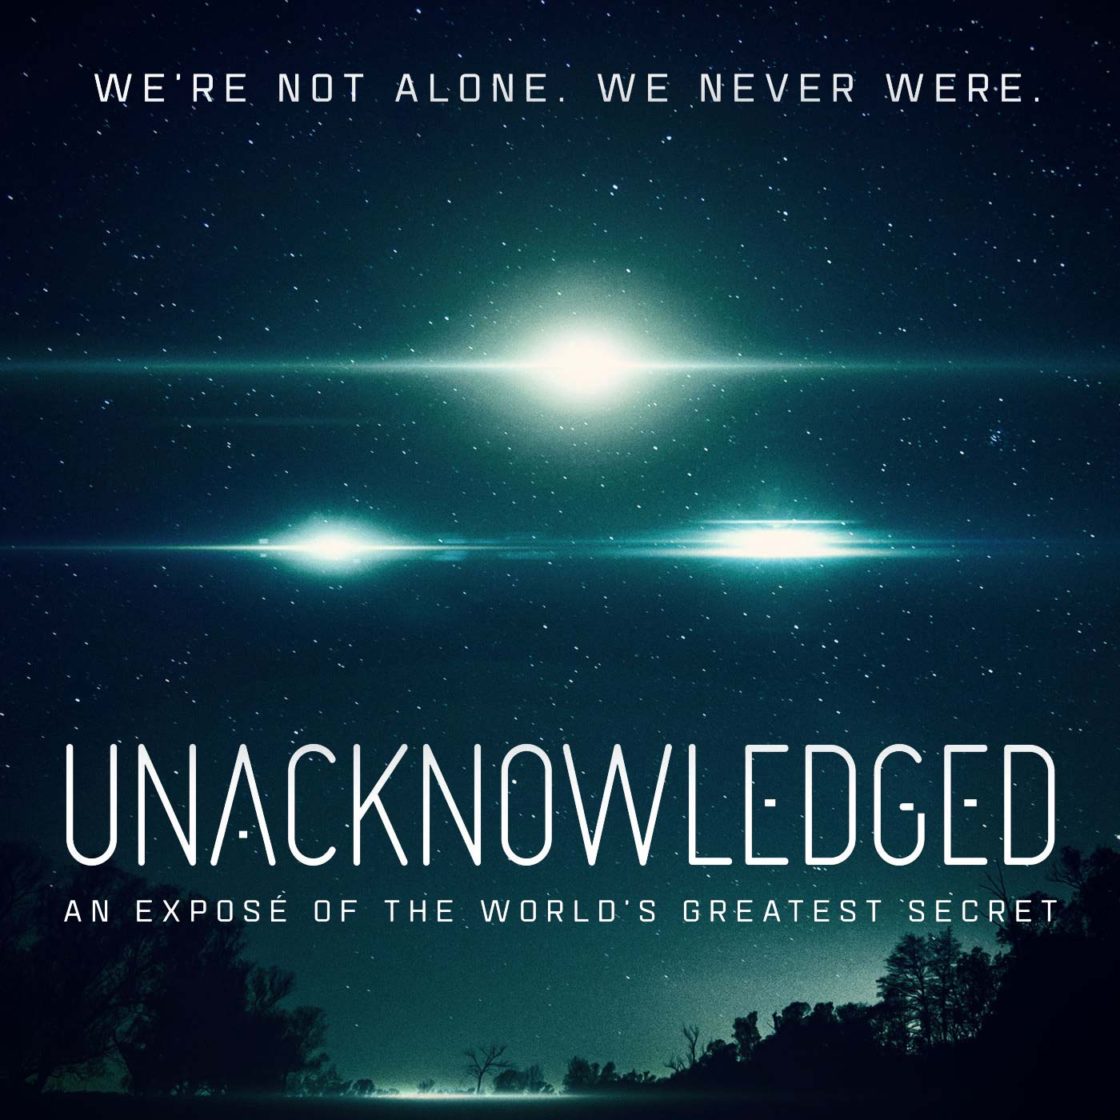 Skeptic Reading Room Unsubstantiated A New Netflix Documentary Purporting To Provide Proof Of Alien Visitation Fails To Deliver